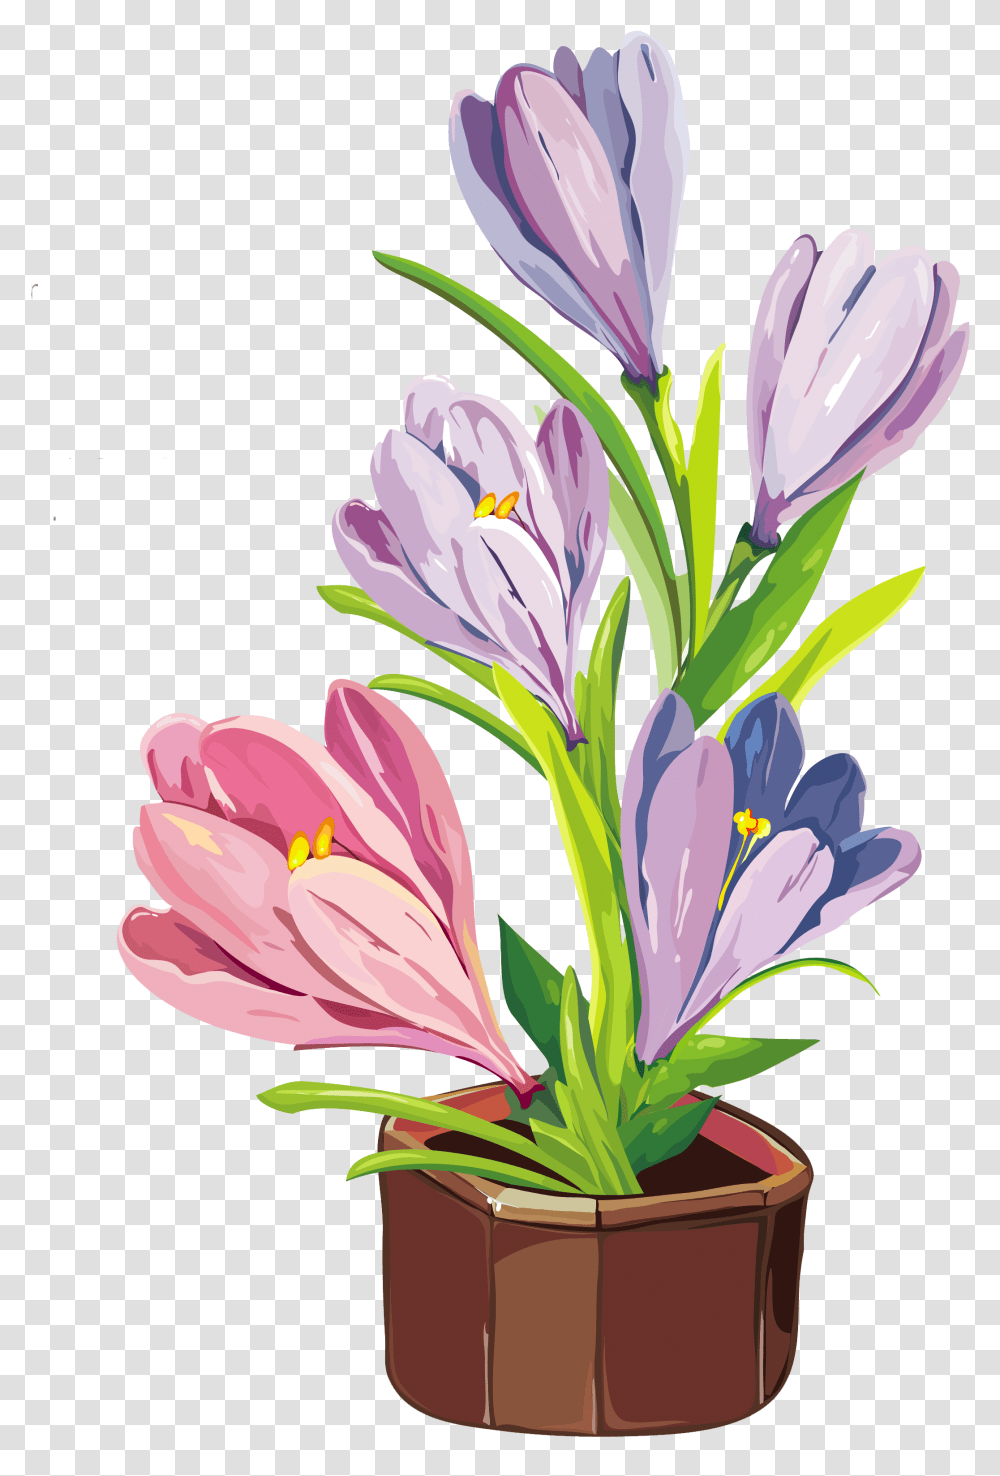 Spring Crocus Pot Clipart Fabric Painting Flower Pot, Plant, Blossom, Lily, Flax Transparent Png